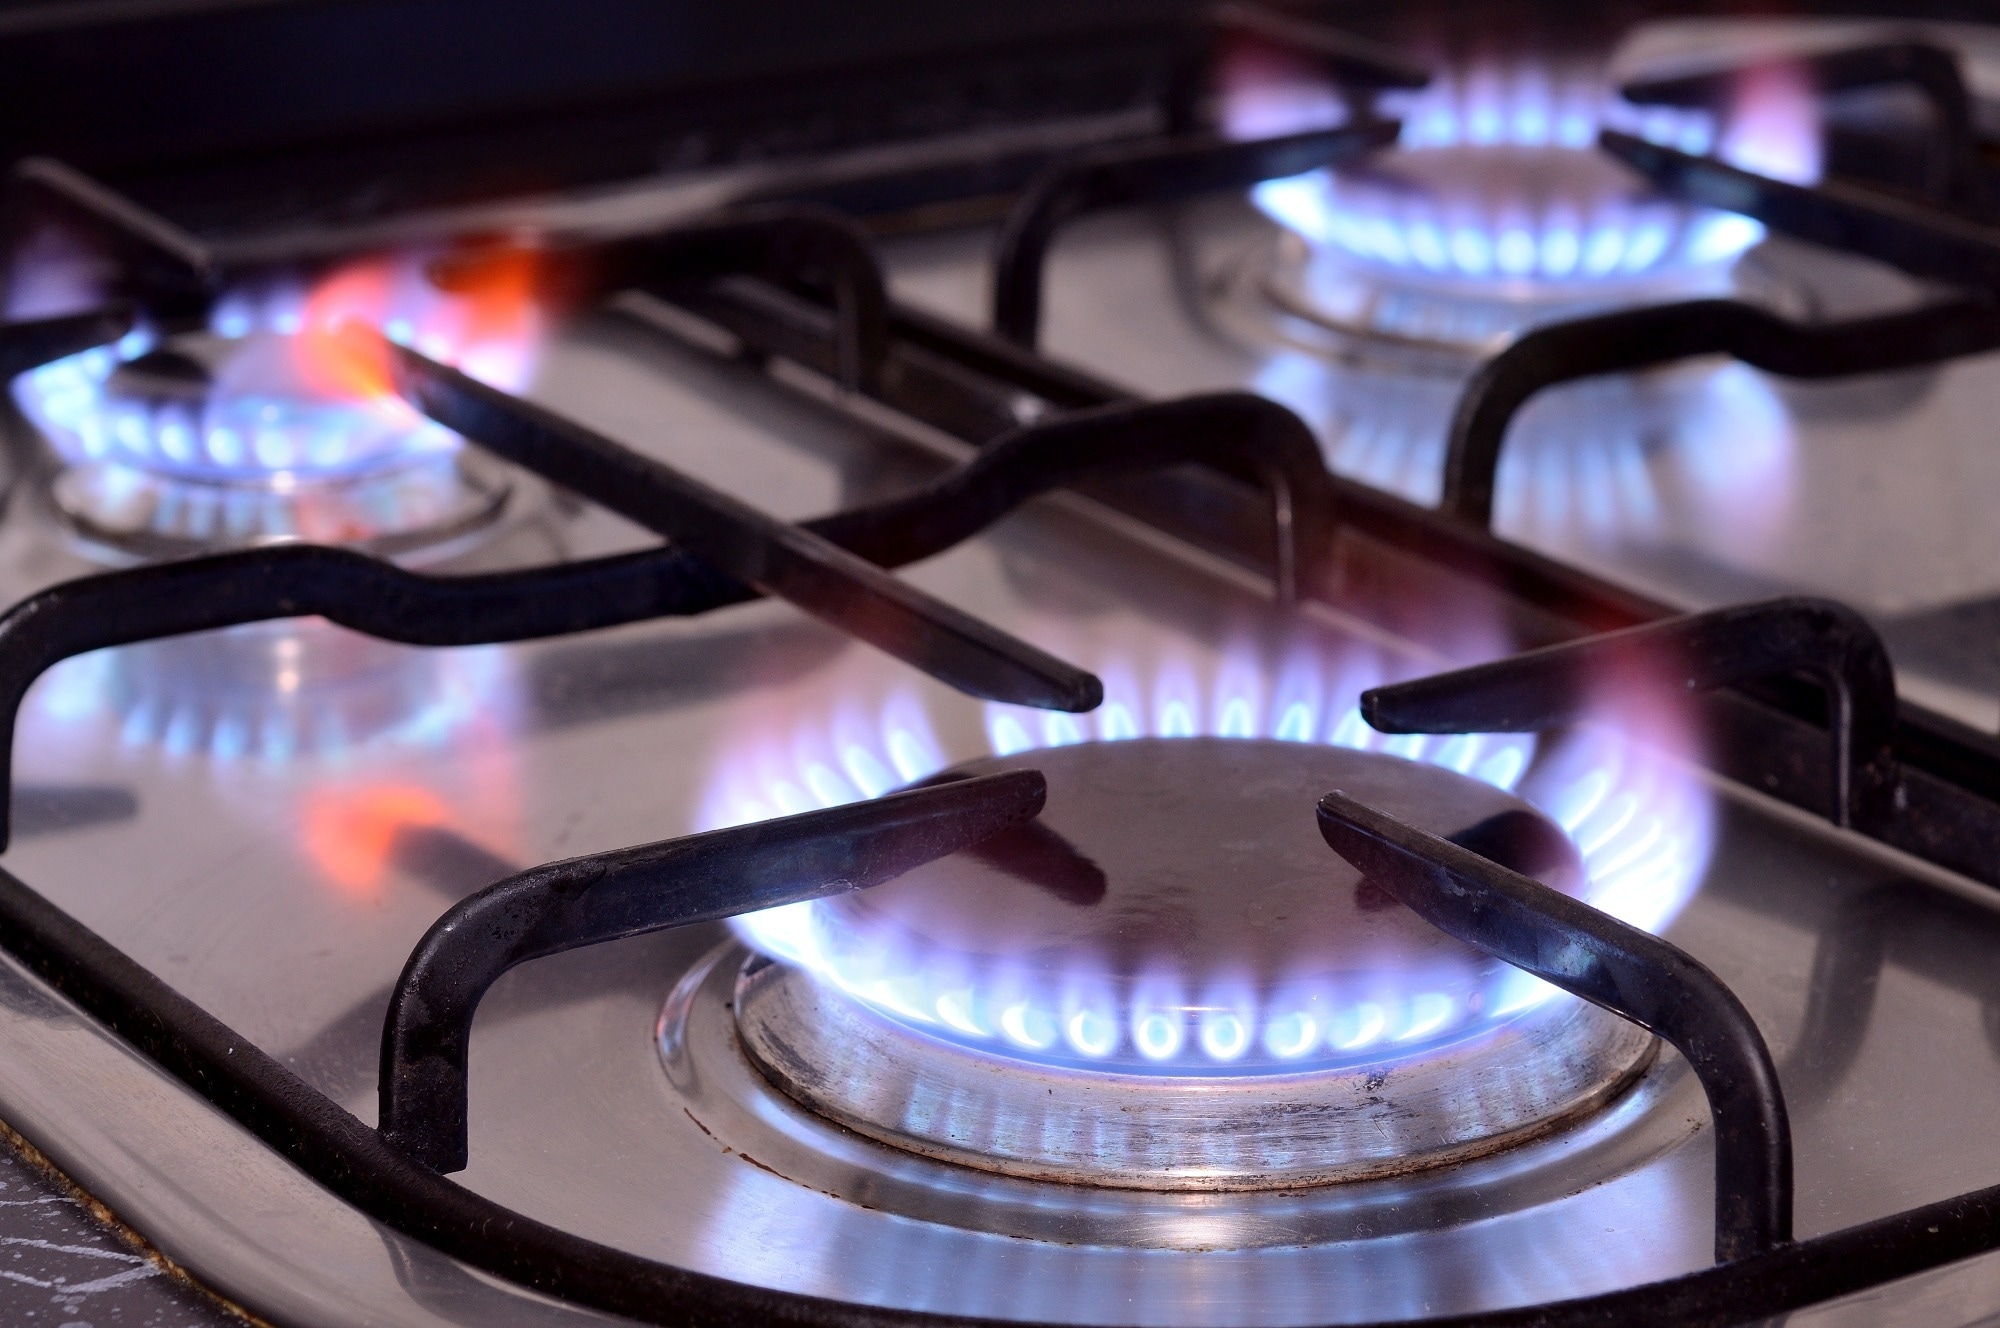 Study: Gas and Propane Combustion from Stoves Emits Benzene and Increases Indoor Air Pollution. Image Credit: Hamik/Shutterstock.com